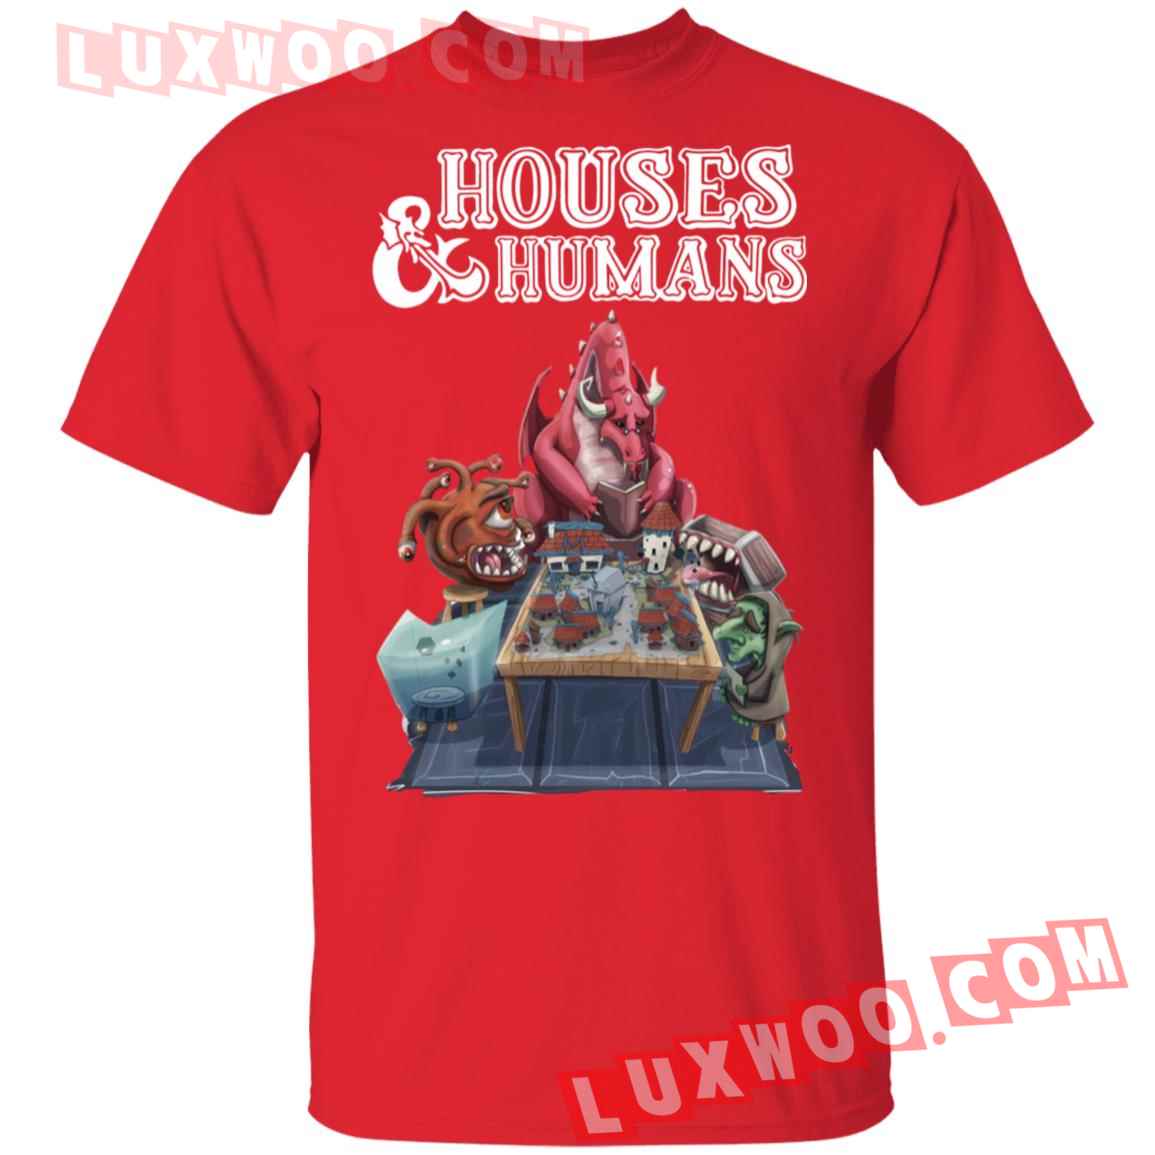 Houses And Humans Shirt - Luxwoo.com